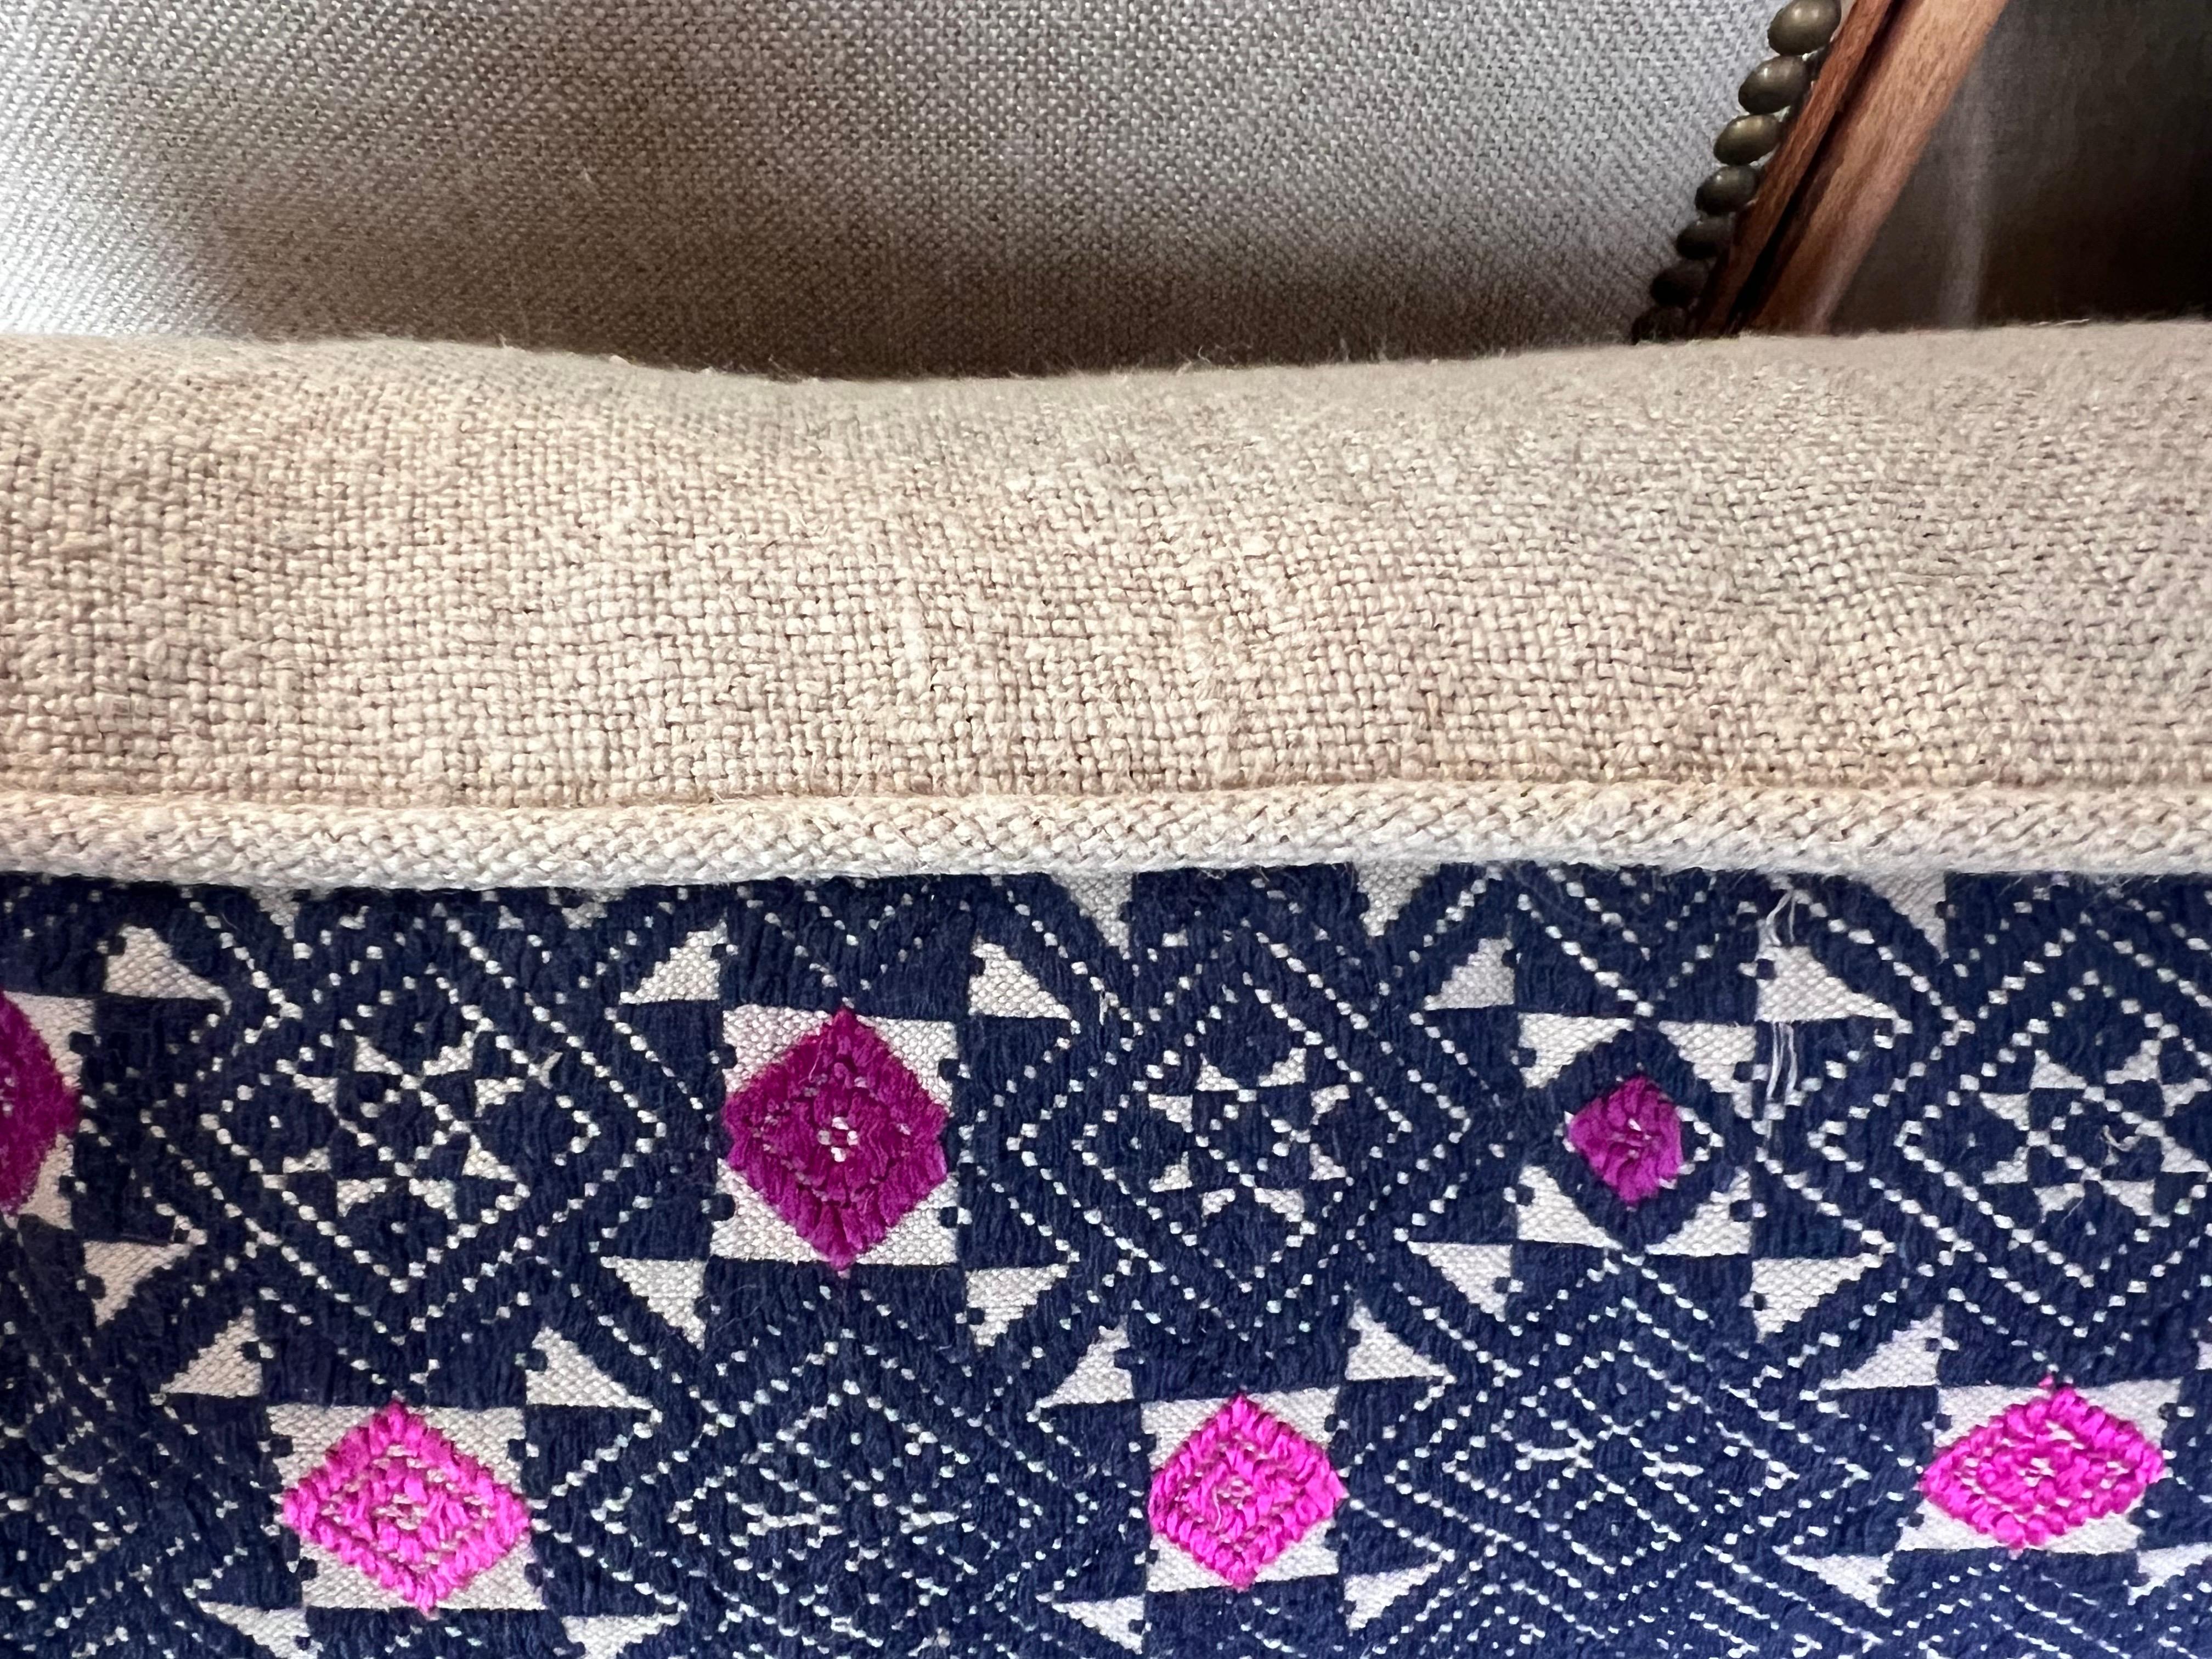 Hand-Woven Navy & Pink Geometric Woven Tribal Pillow For Sale